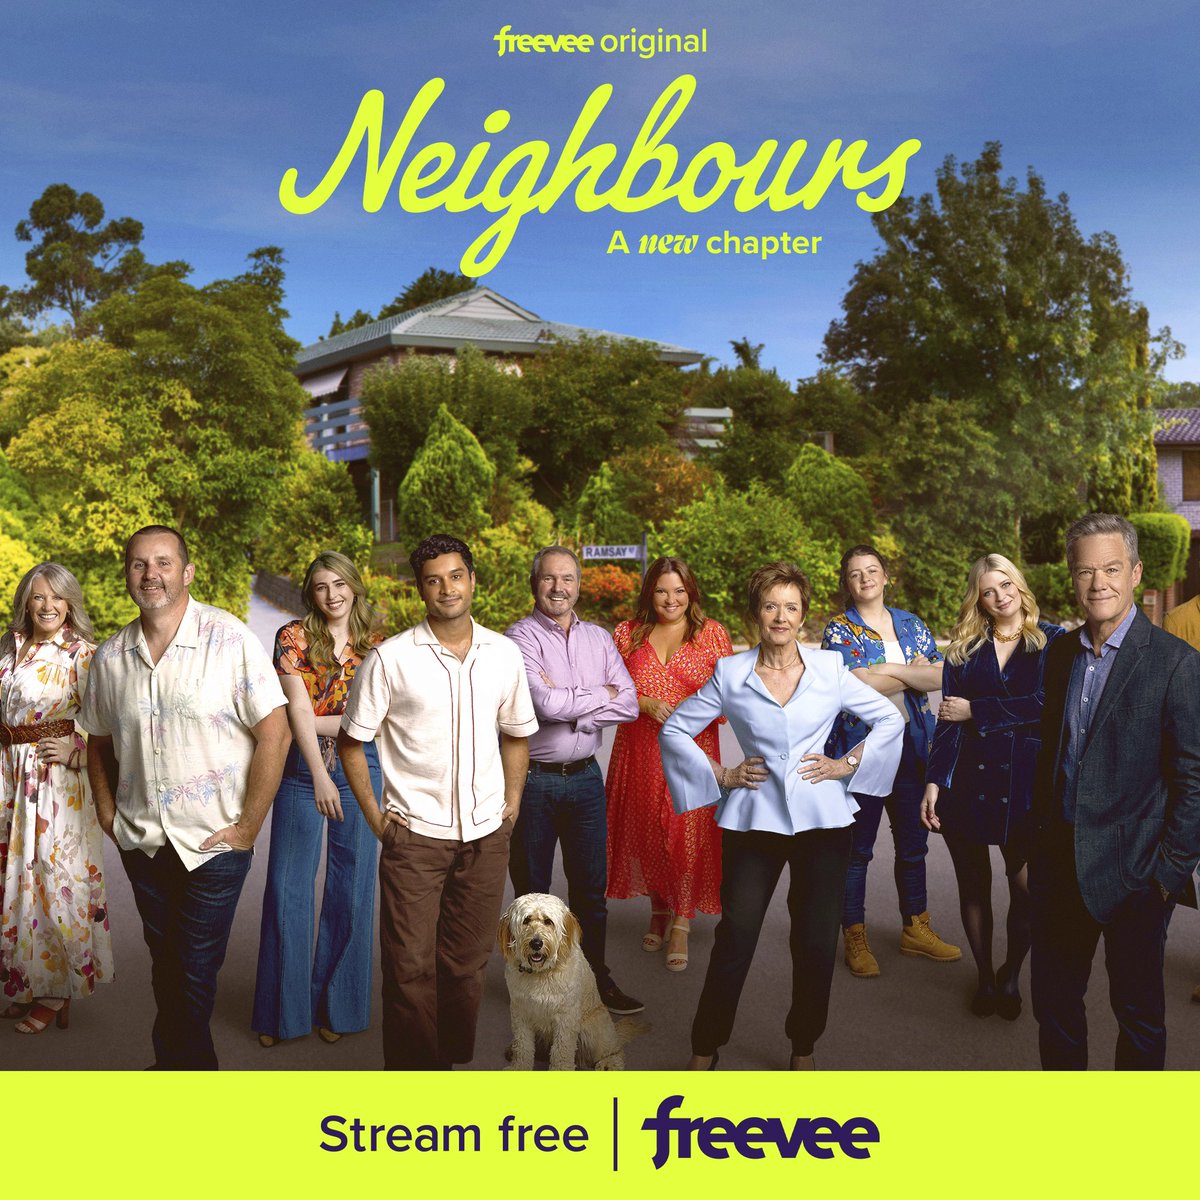 When good neighbours become good friends 🏡😃🏡 A new chapter of Neighbours is free to stream from 18 September. #NeighboursonAmazonFreevee